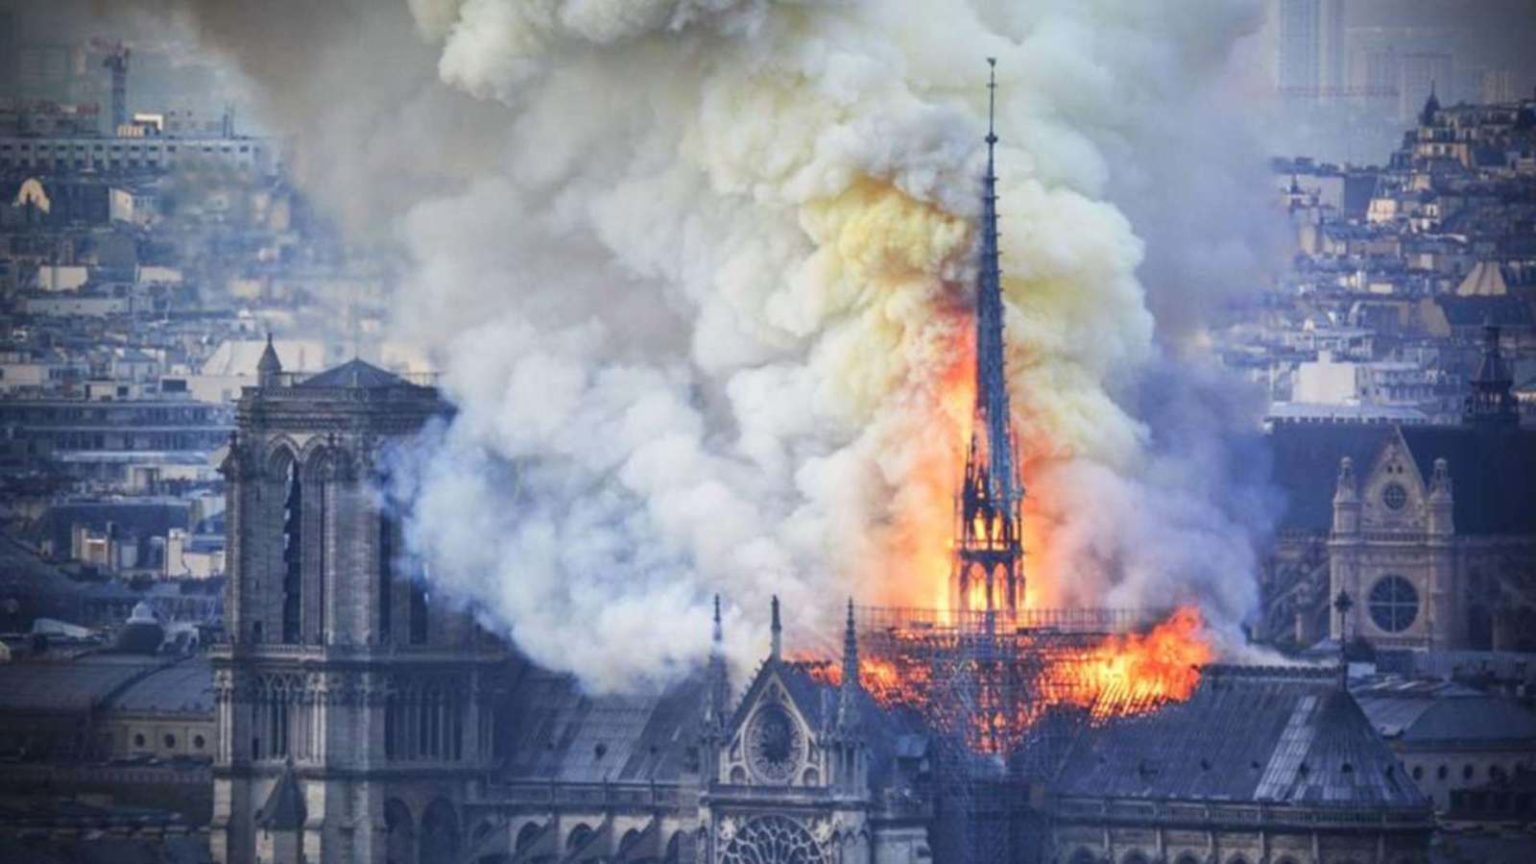 DJI drones helped firefighters to put out Notre Dame inferno 1